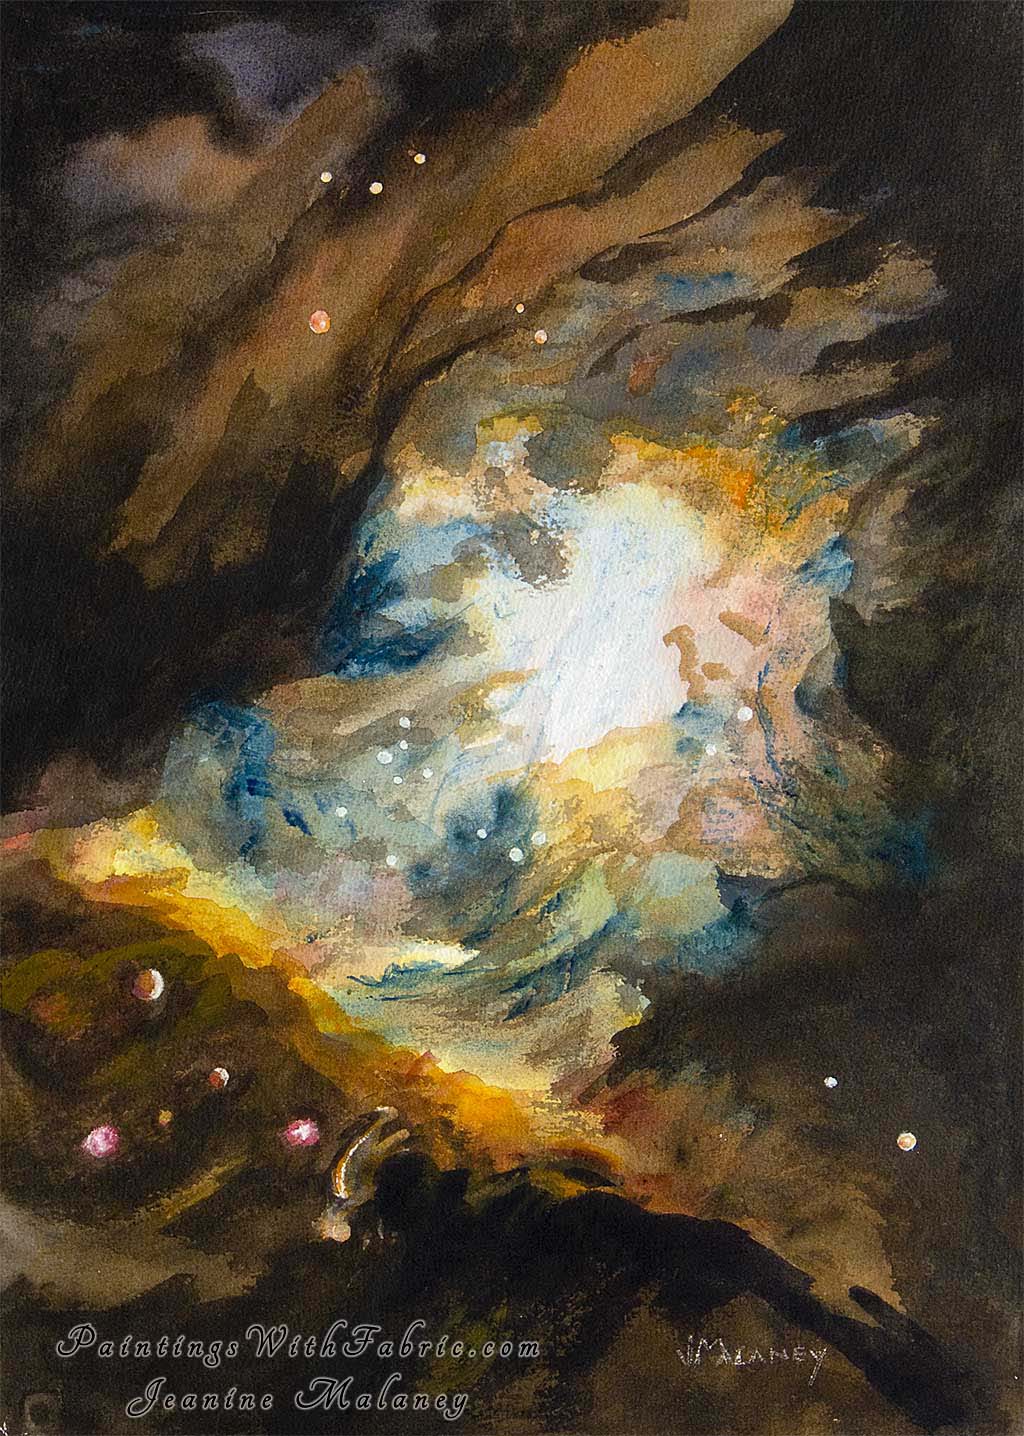 Window to the Source Unframed Original Watercolor Painting of the Great Orion Nebula